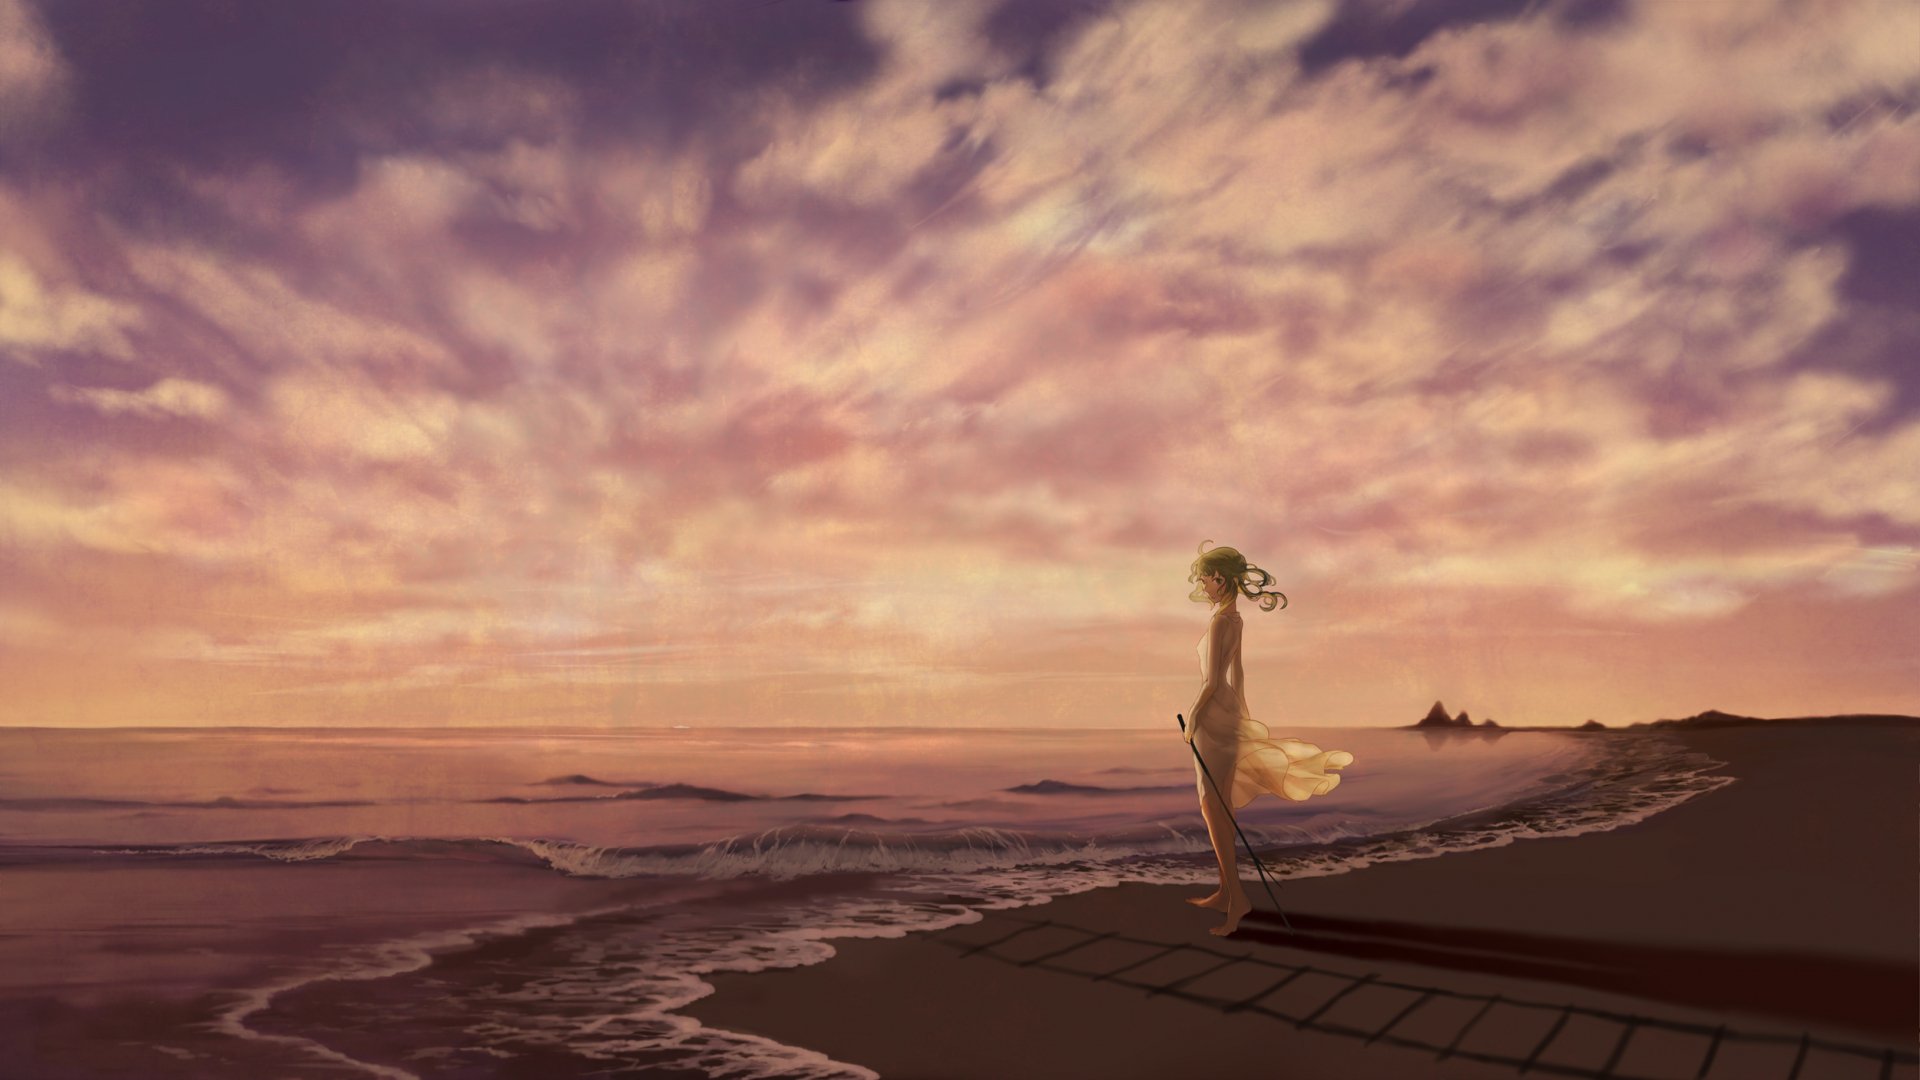 Download GUMI (Vocaloid) Sunset Anime Vocaloid  HD Wallpaper by Tomero